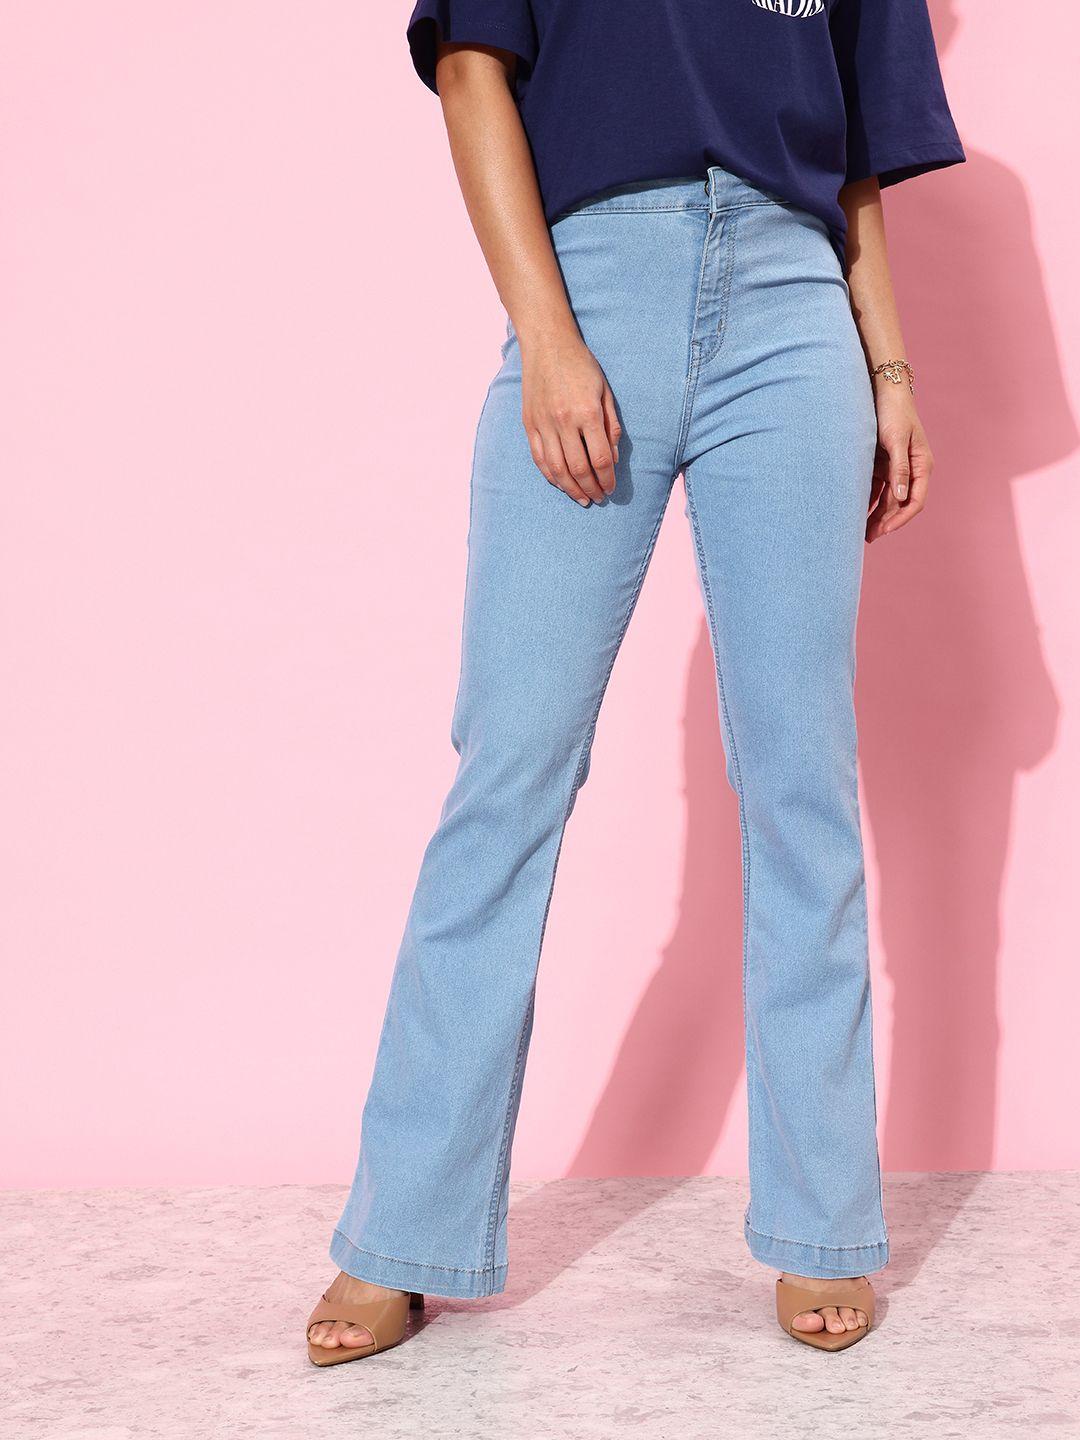 the-roadster-life-co.-women-sky-blue-vacay-chill-rodeo-bootcuts-high-rise-denim-jeggings